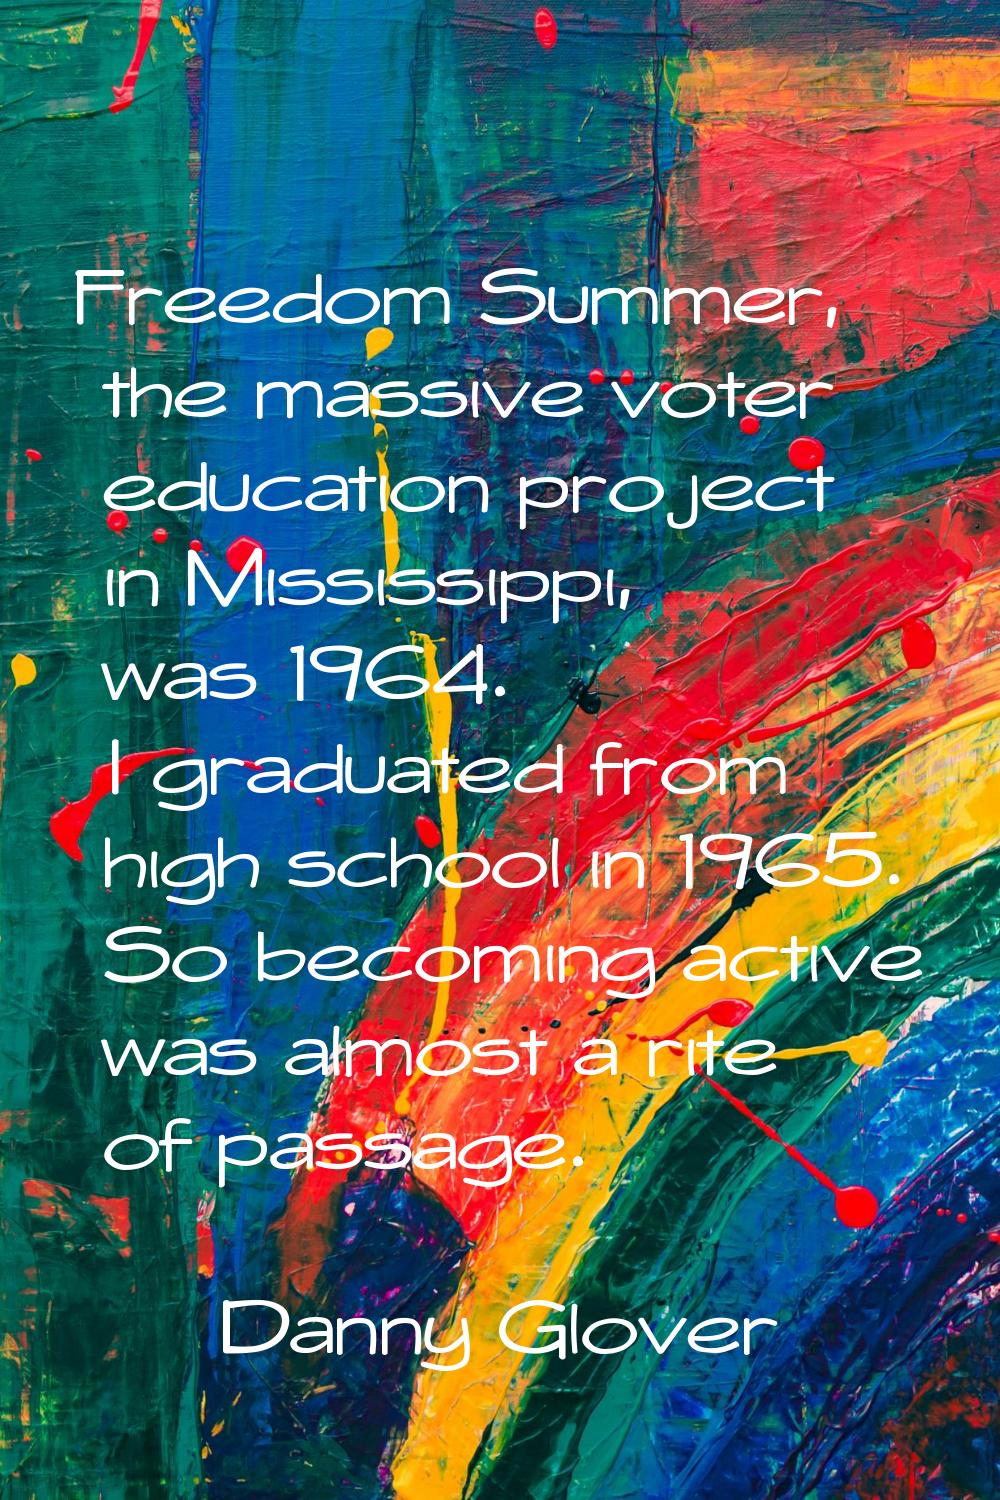 Freedom Summer, the massive voter education project in Mississippi, was 1964. I graduated from high